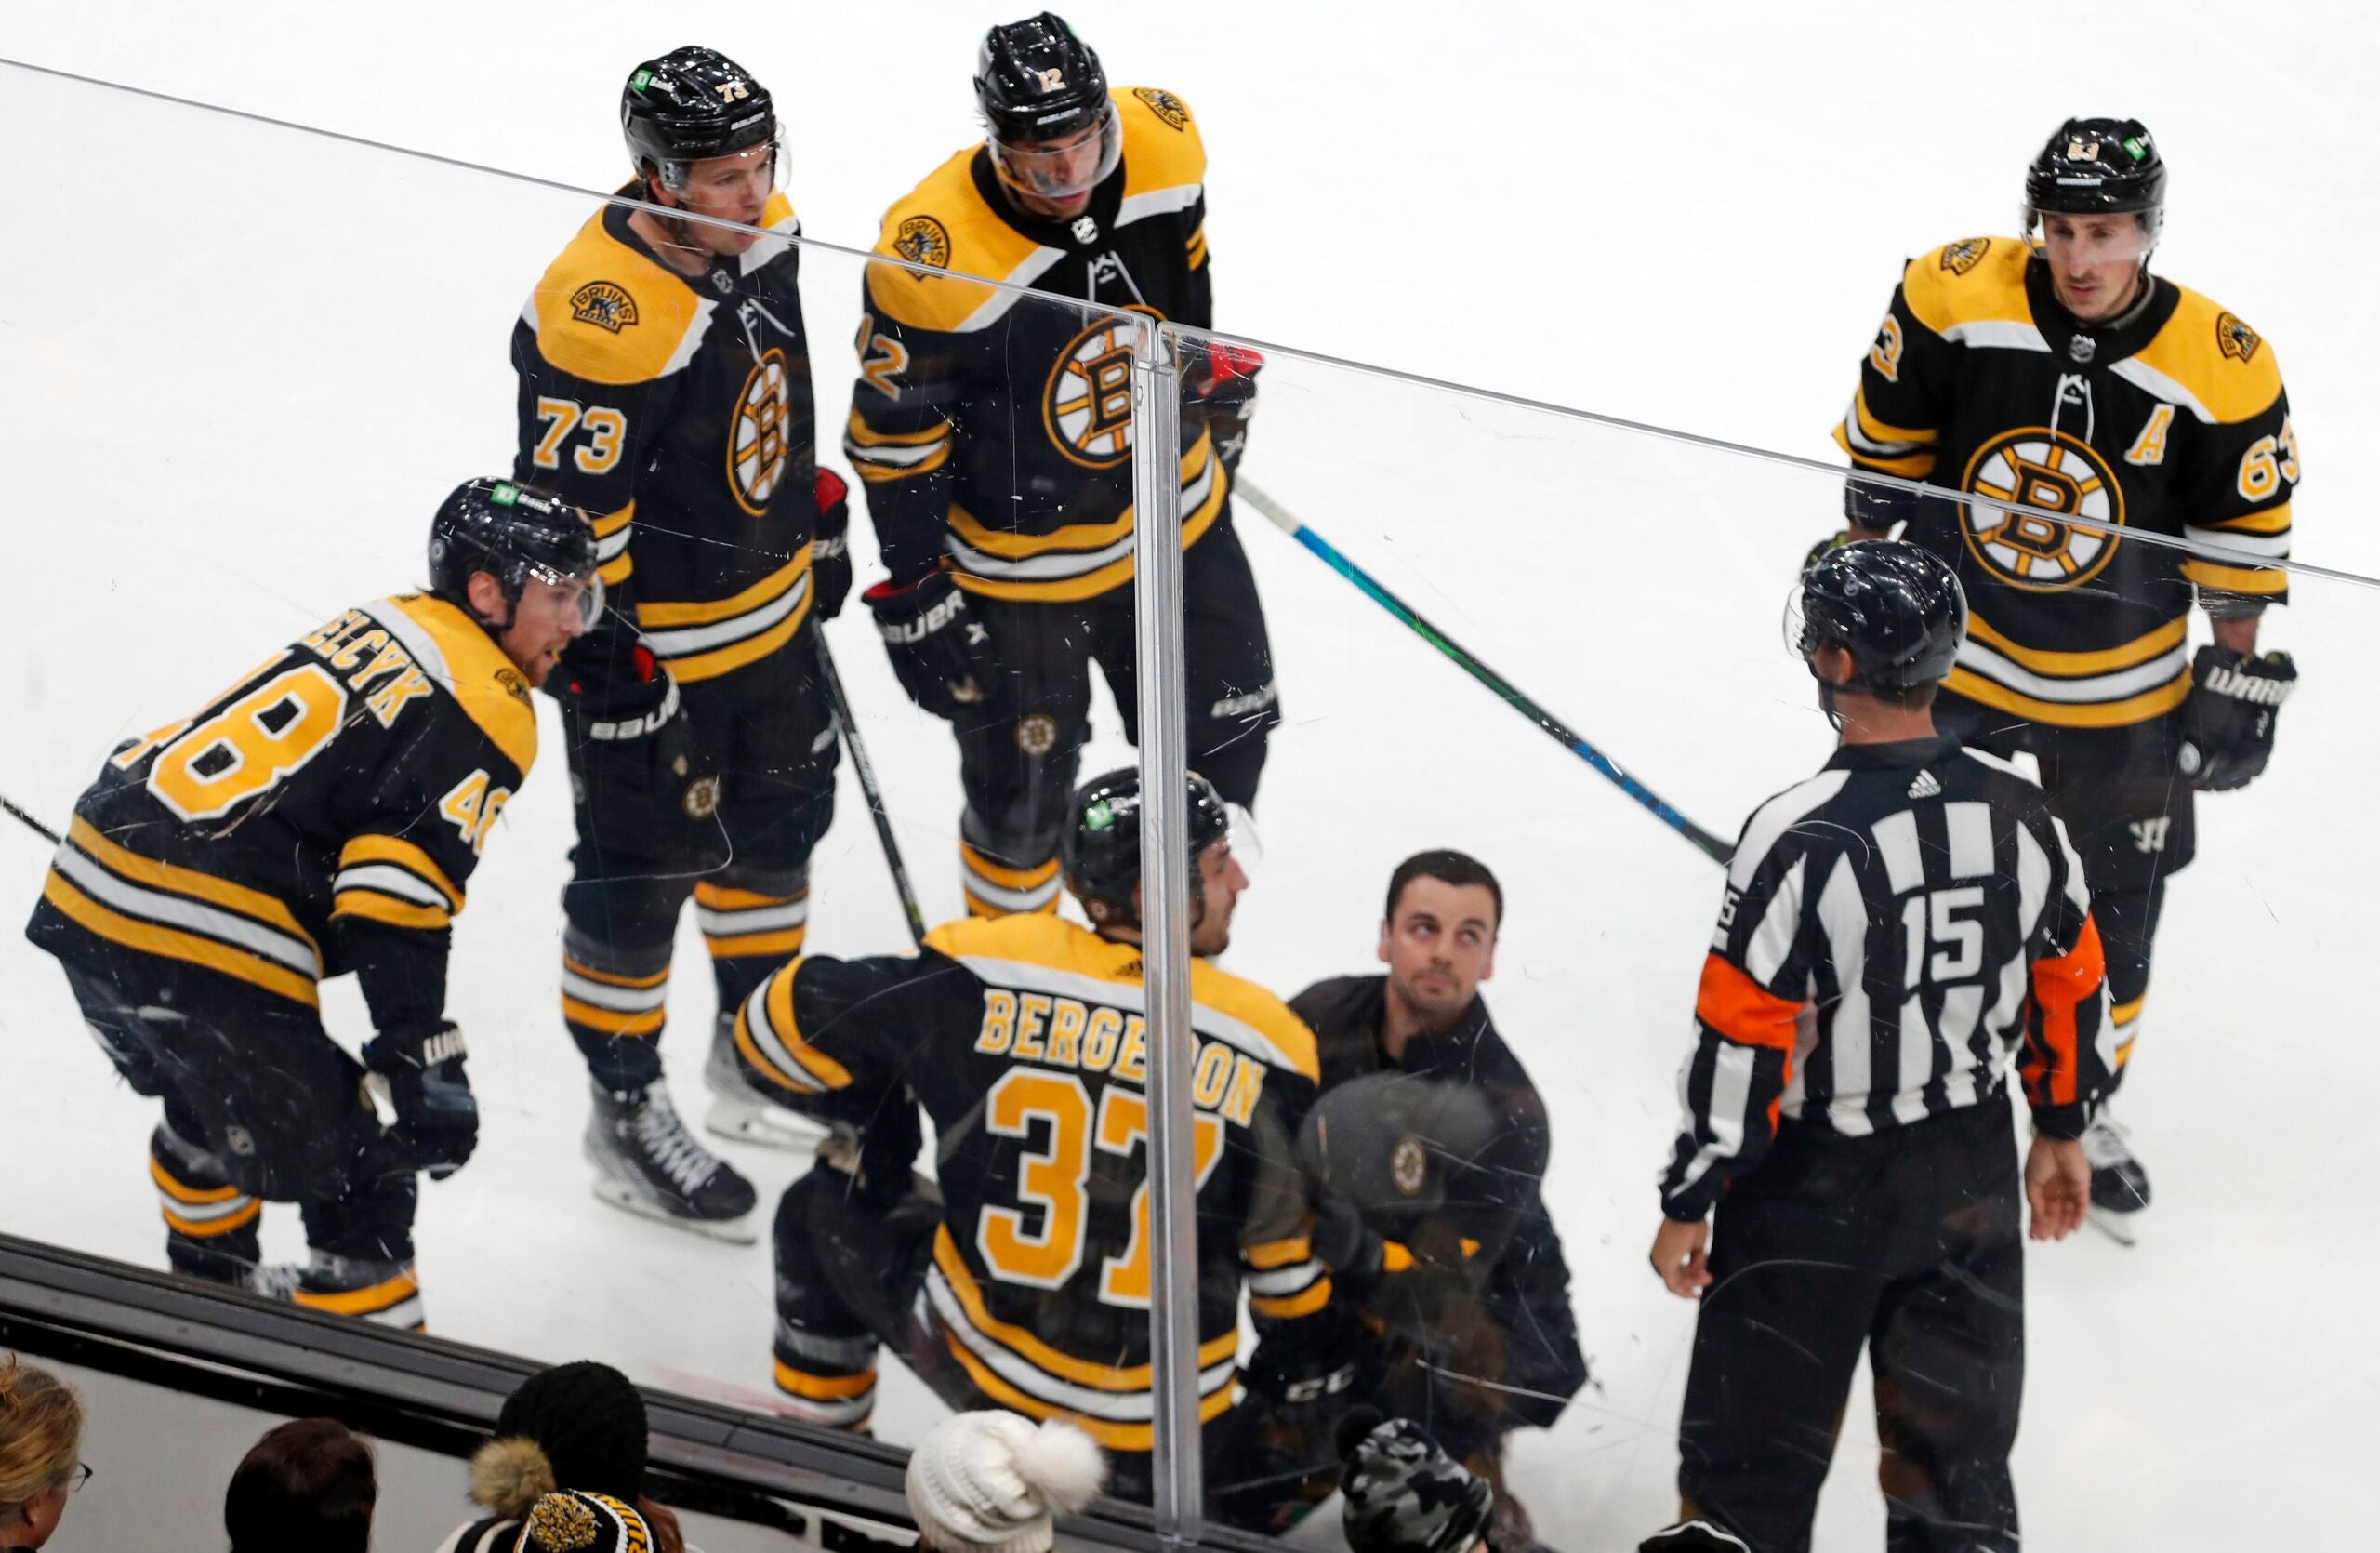 Five minutes for licking! NHL warns of supplemental discipline if